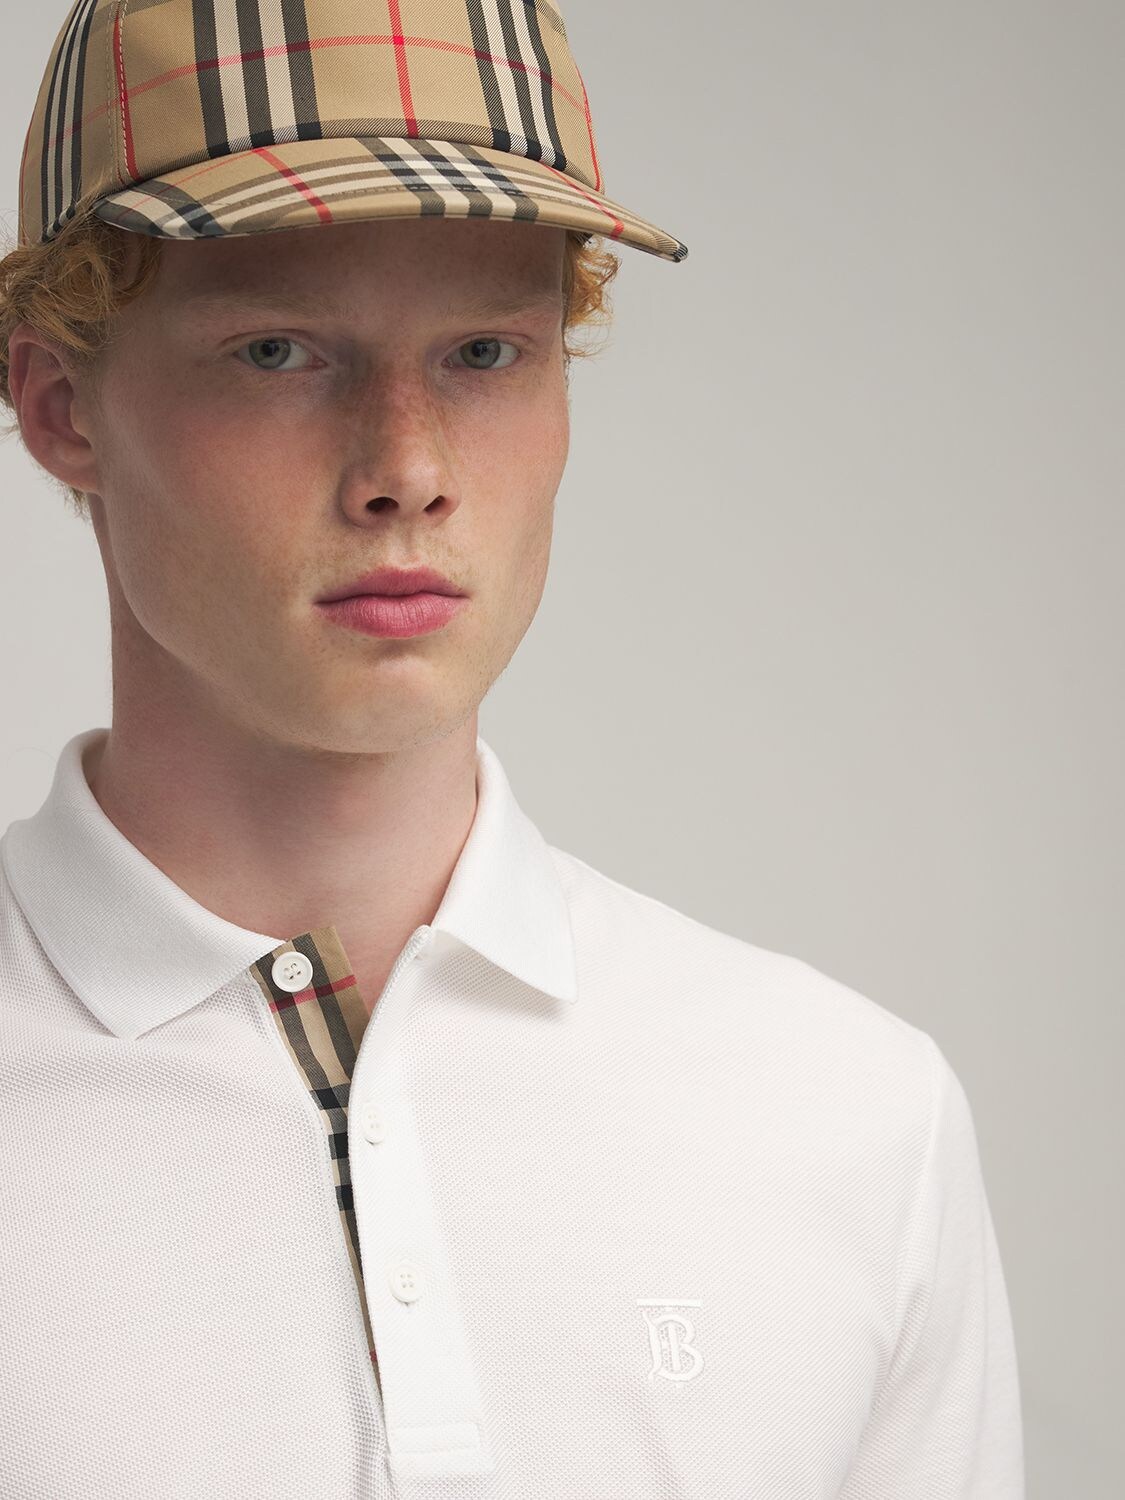 Exaggerated Check Cotton Bucket Hat in Archive Beige | Burberry® Official